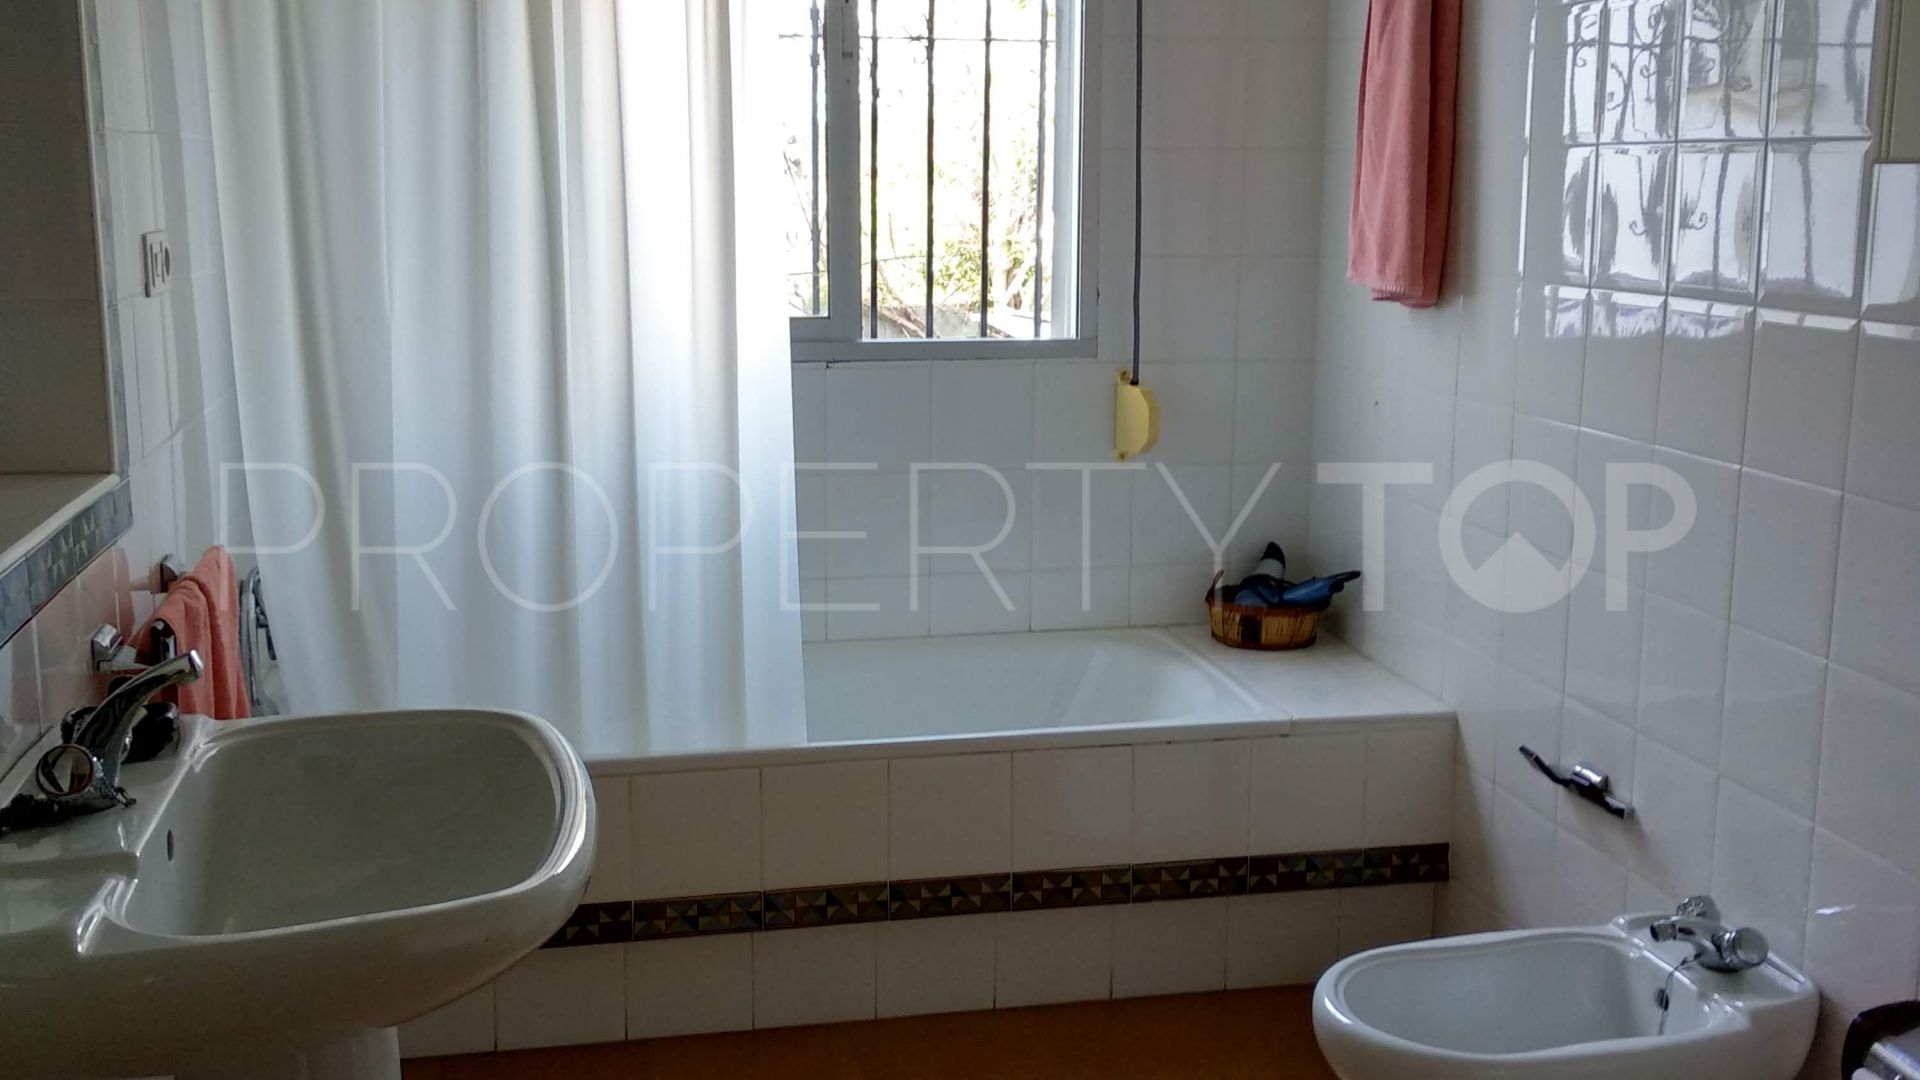 For sale country house in Alhaurin de la Torre